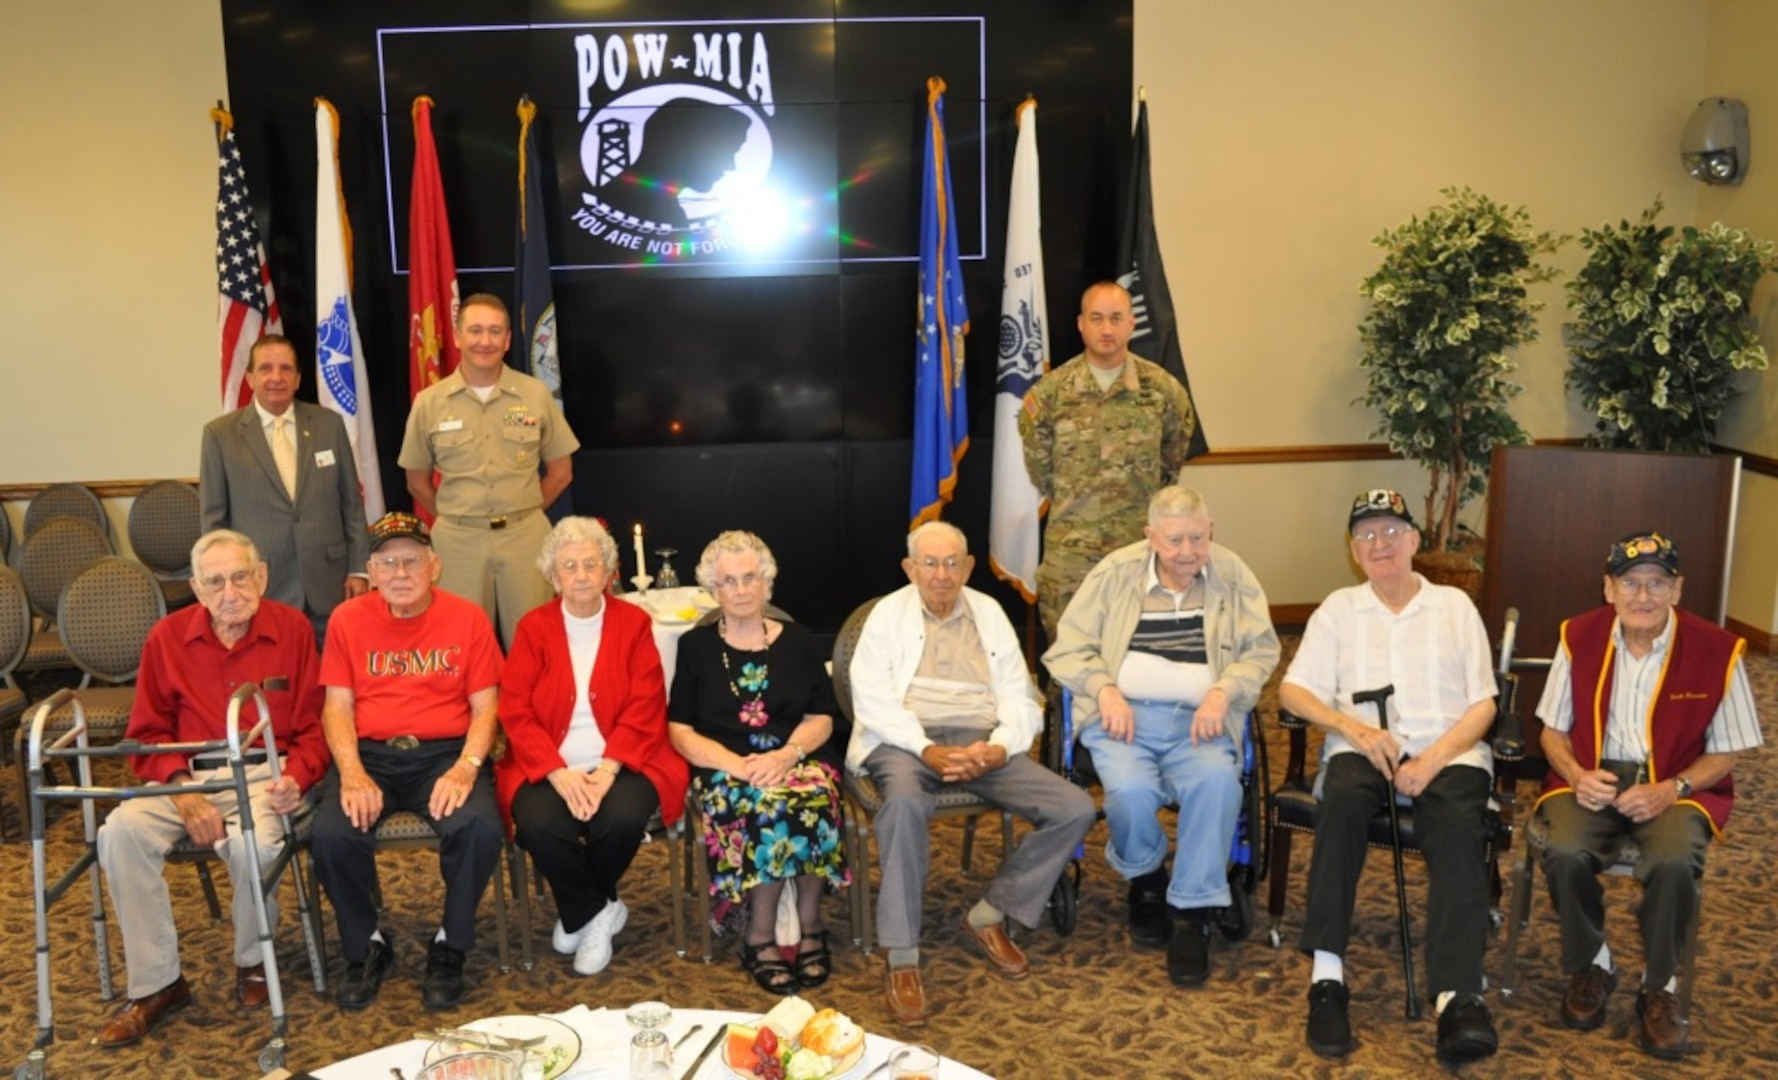 150917-N-JW847-003- (Back Row,L-R) Former Veterans of Foreign Wars of the United States Commander-in-Chief Bill Thien, NSA Crane Commanding Officer Cmdr. Timothy Craddock and CAAA Commander Col. Jim Hooper 

(Front Row, L-R) Former POW and POW widows Vernon Meyer, John Bowling, Pearl Bridgewater, Naomi Summerlot, John Frayser, Gene Saucerman, Paul Wagner and Frank Alexander
